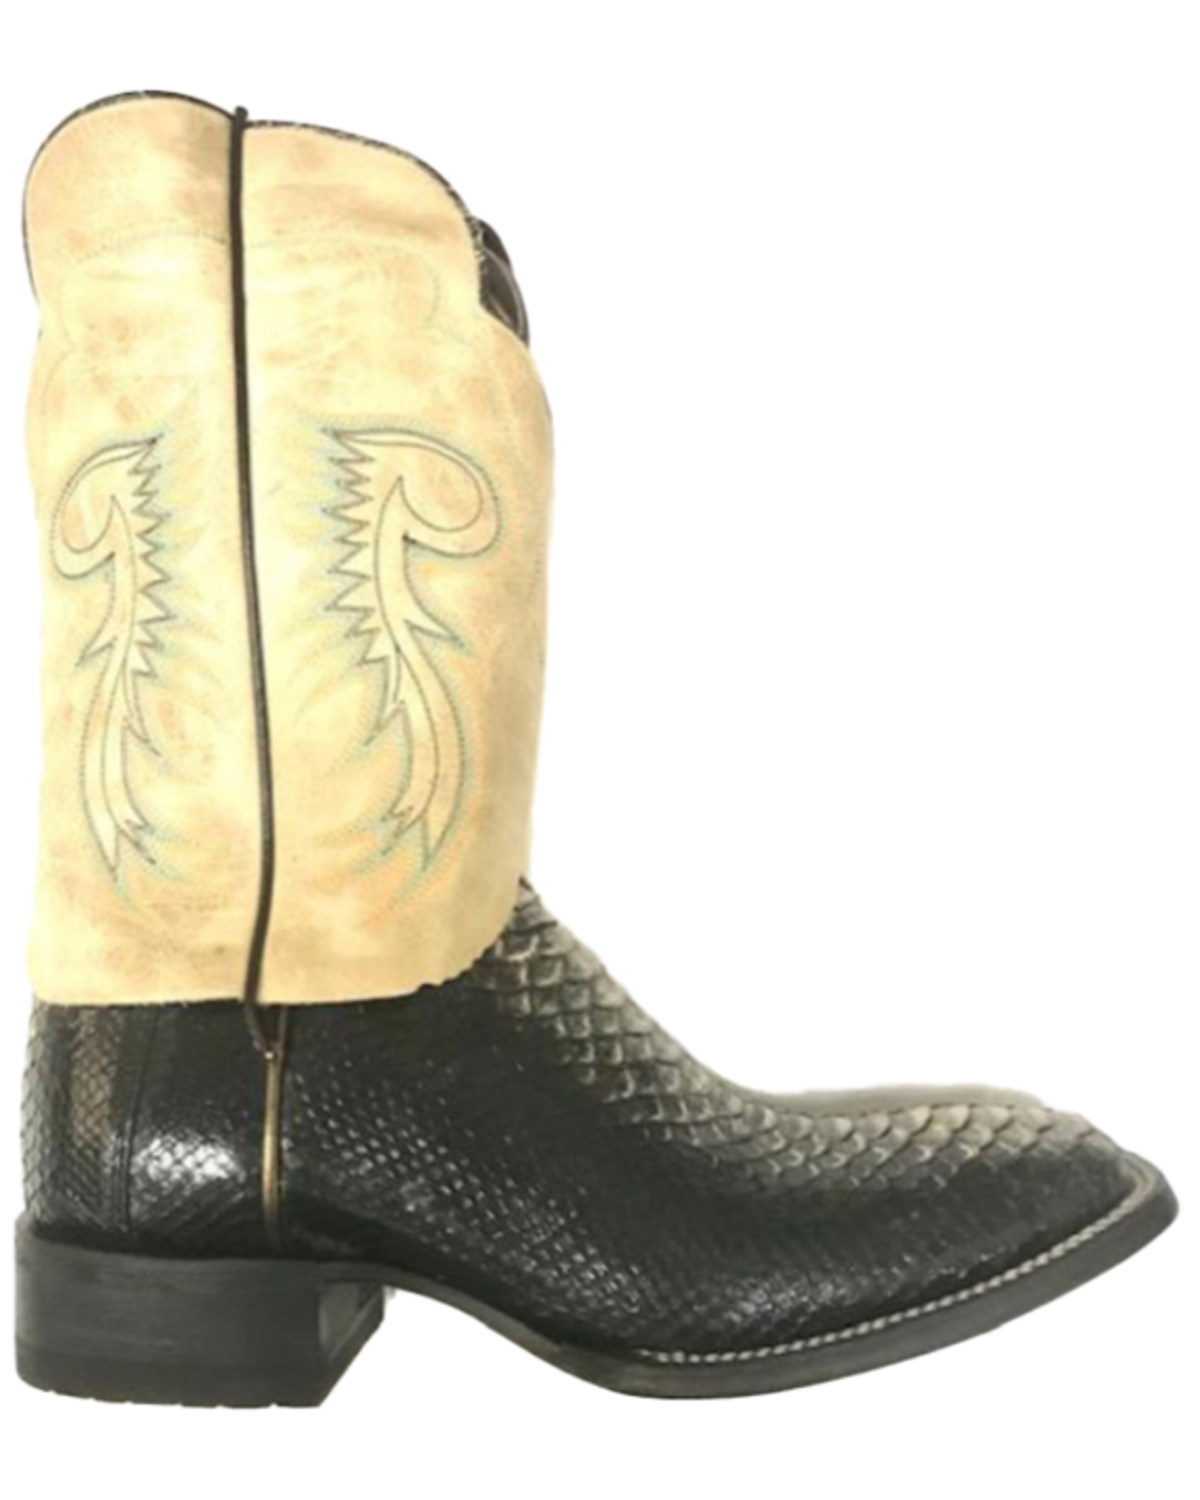 Cody James Men's Luster Exotic Python Western Boots - Broad Square Toe